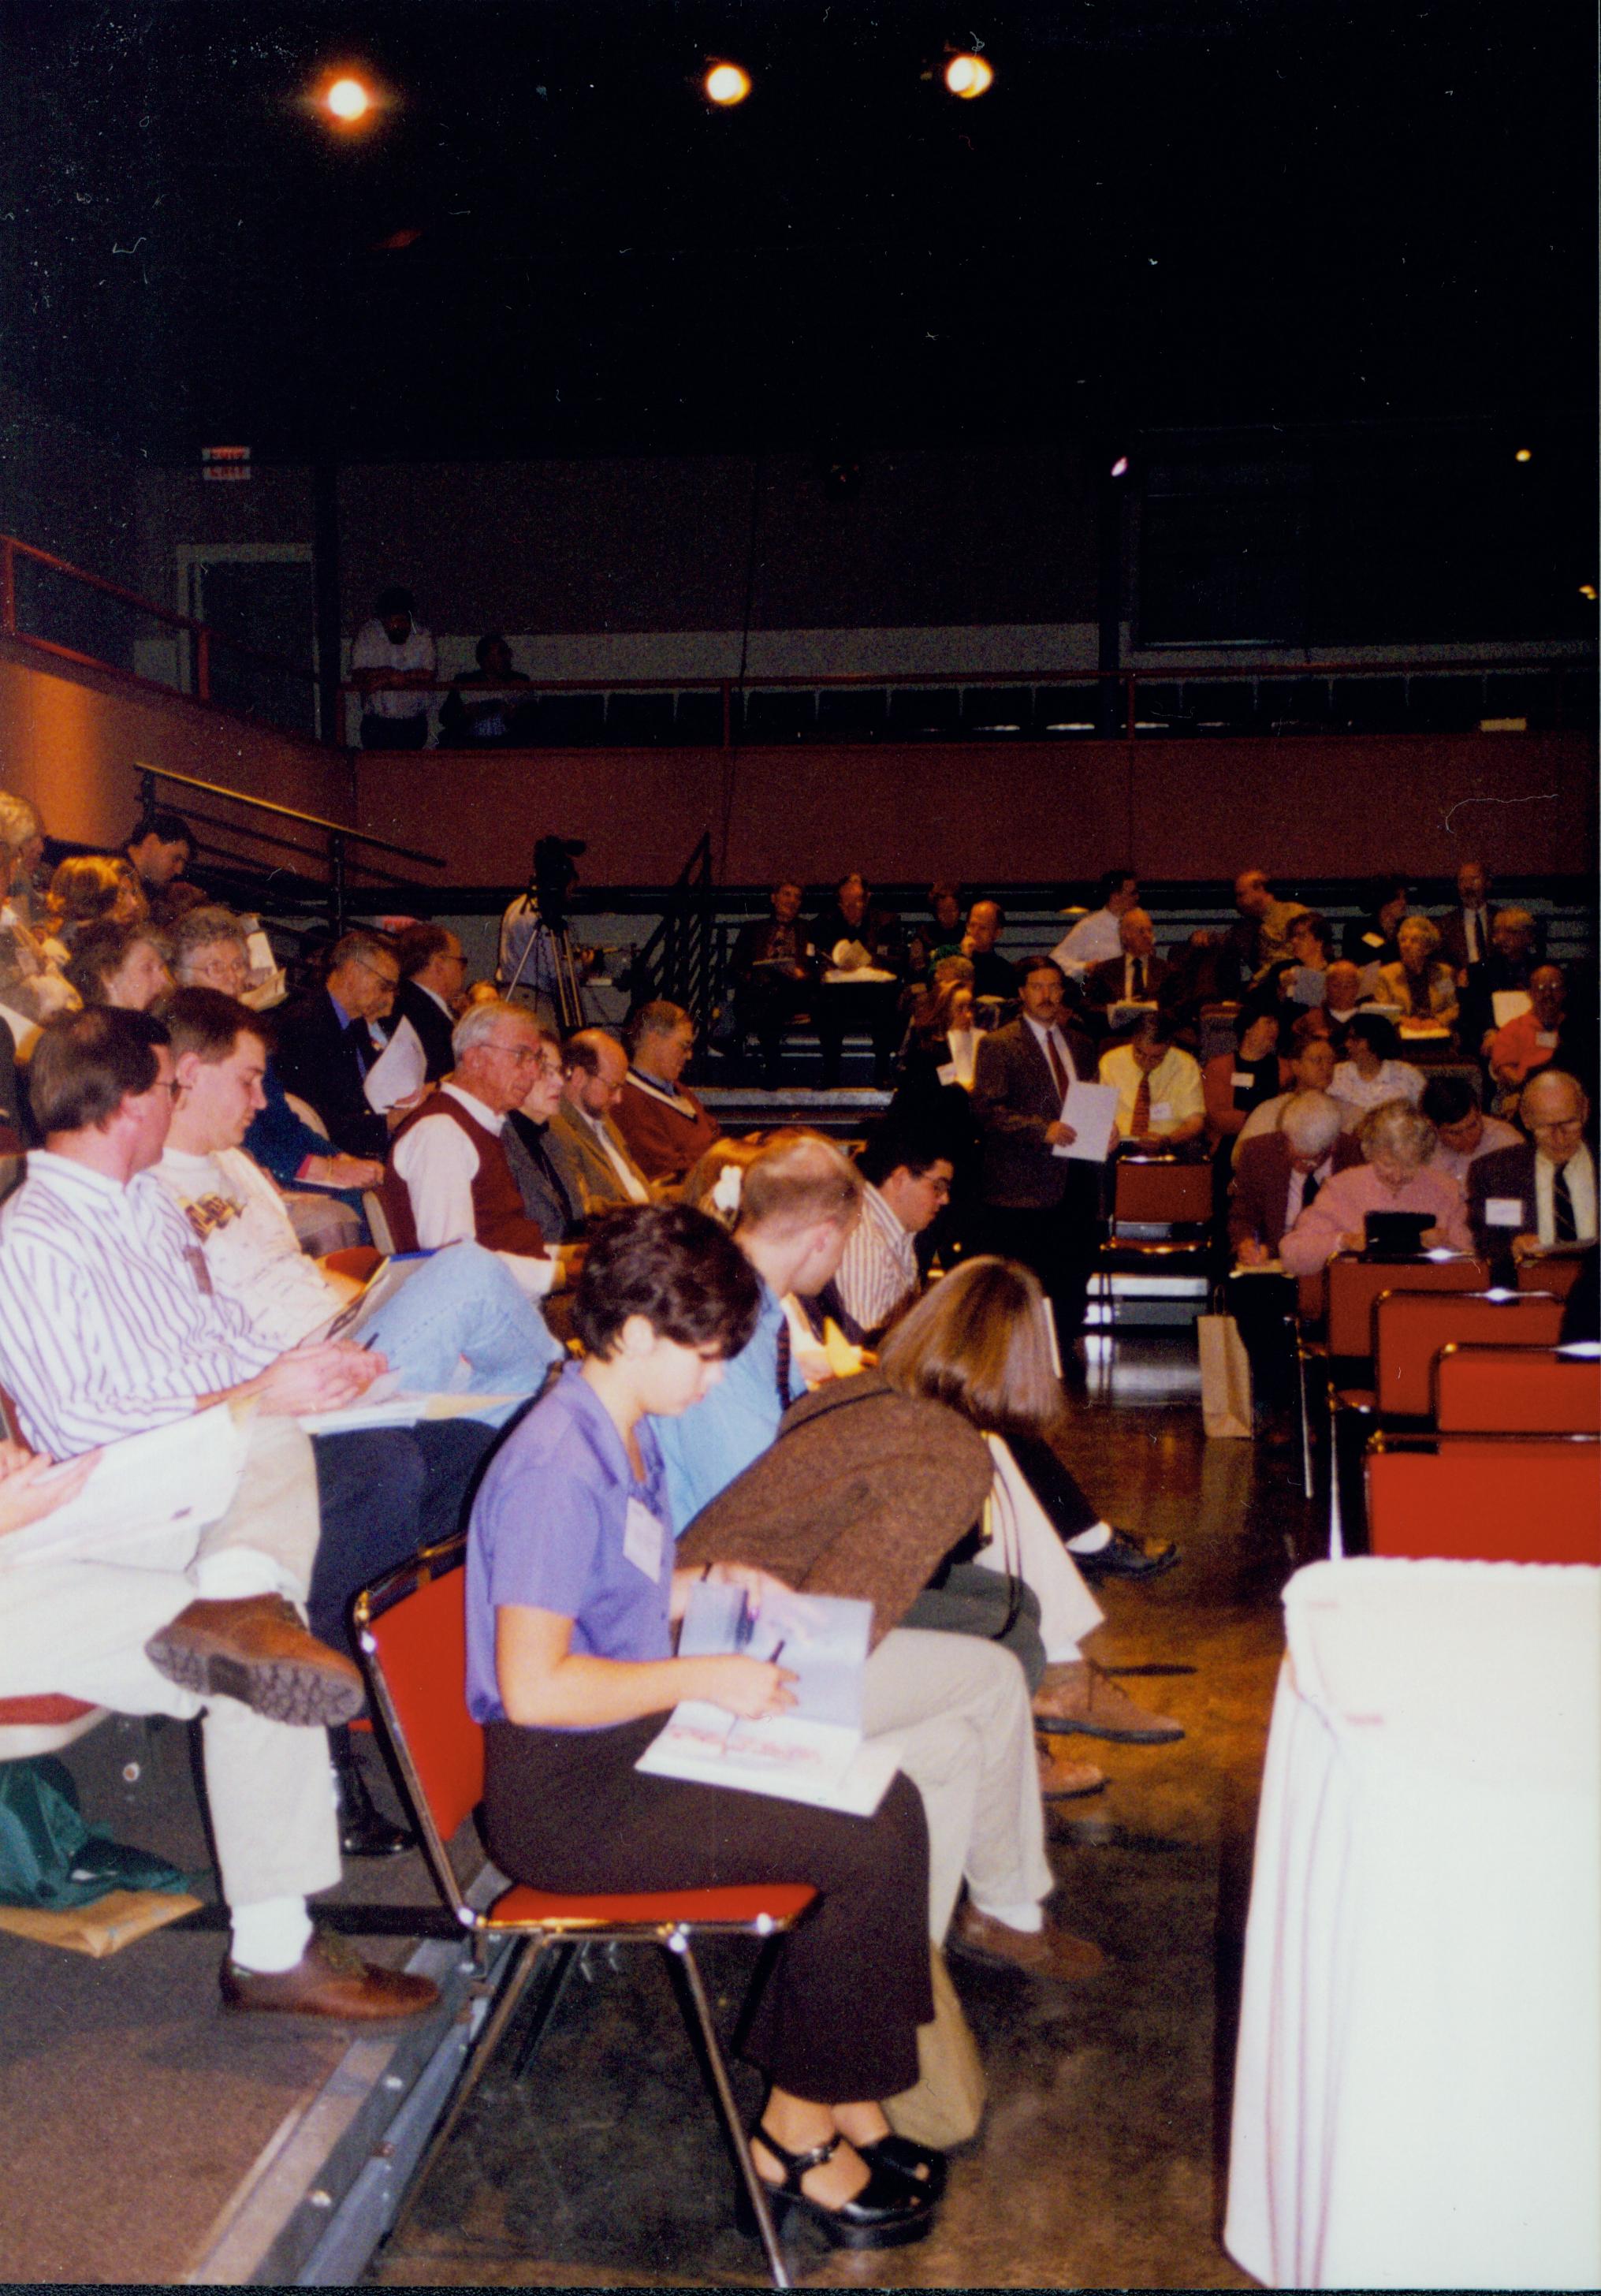 High School guests and participants seated in lecture room. 1-1997 Colloq (color); 3 Colloquium, 1997